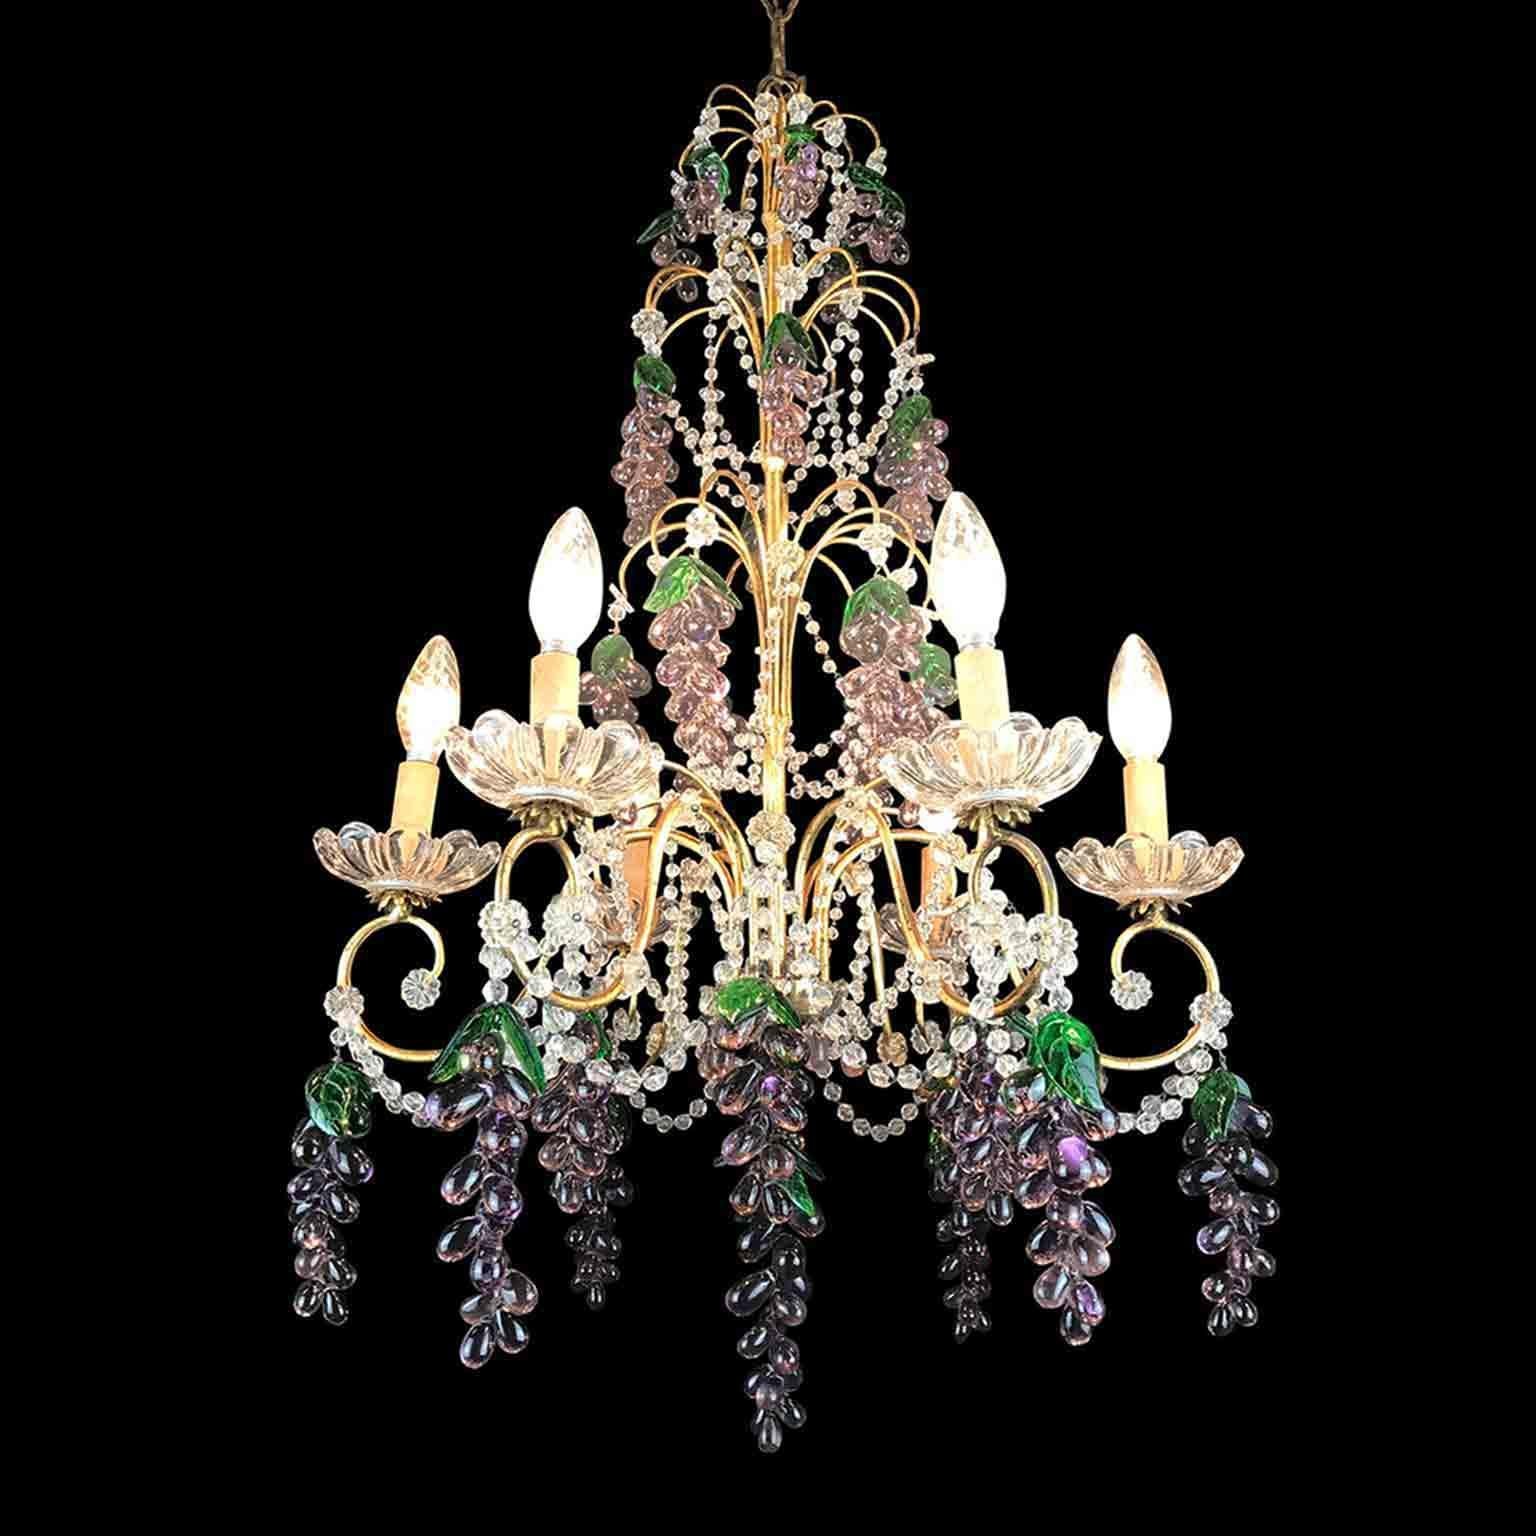 Romantic Pair of Mid-20th Century Italian Chandeliers with Purple Murano Glass Grapes